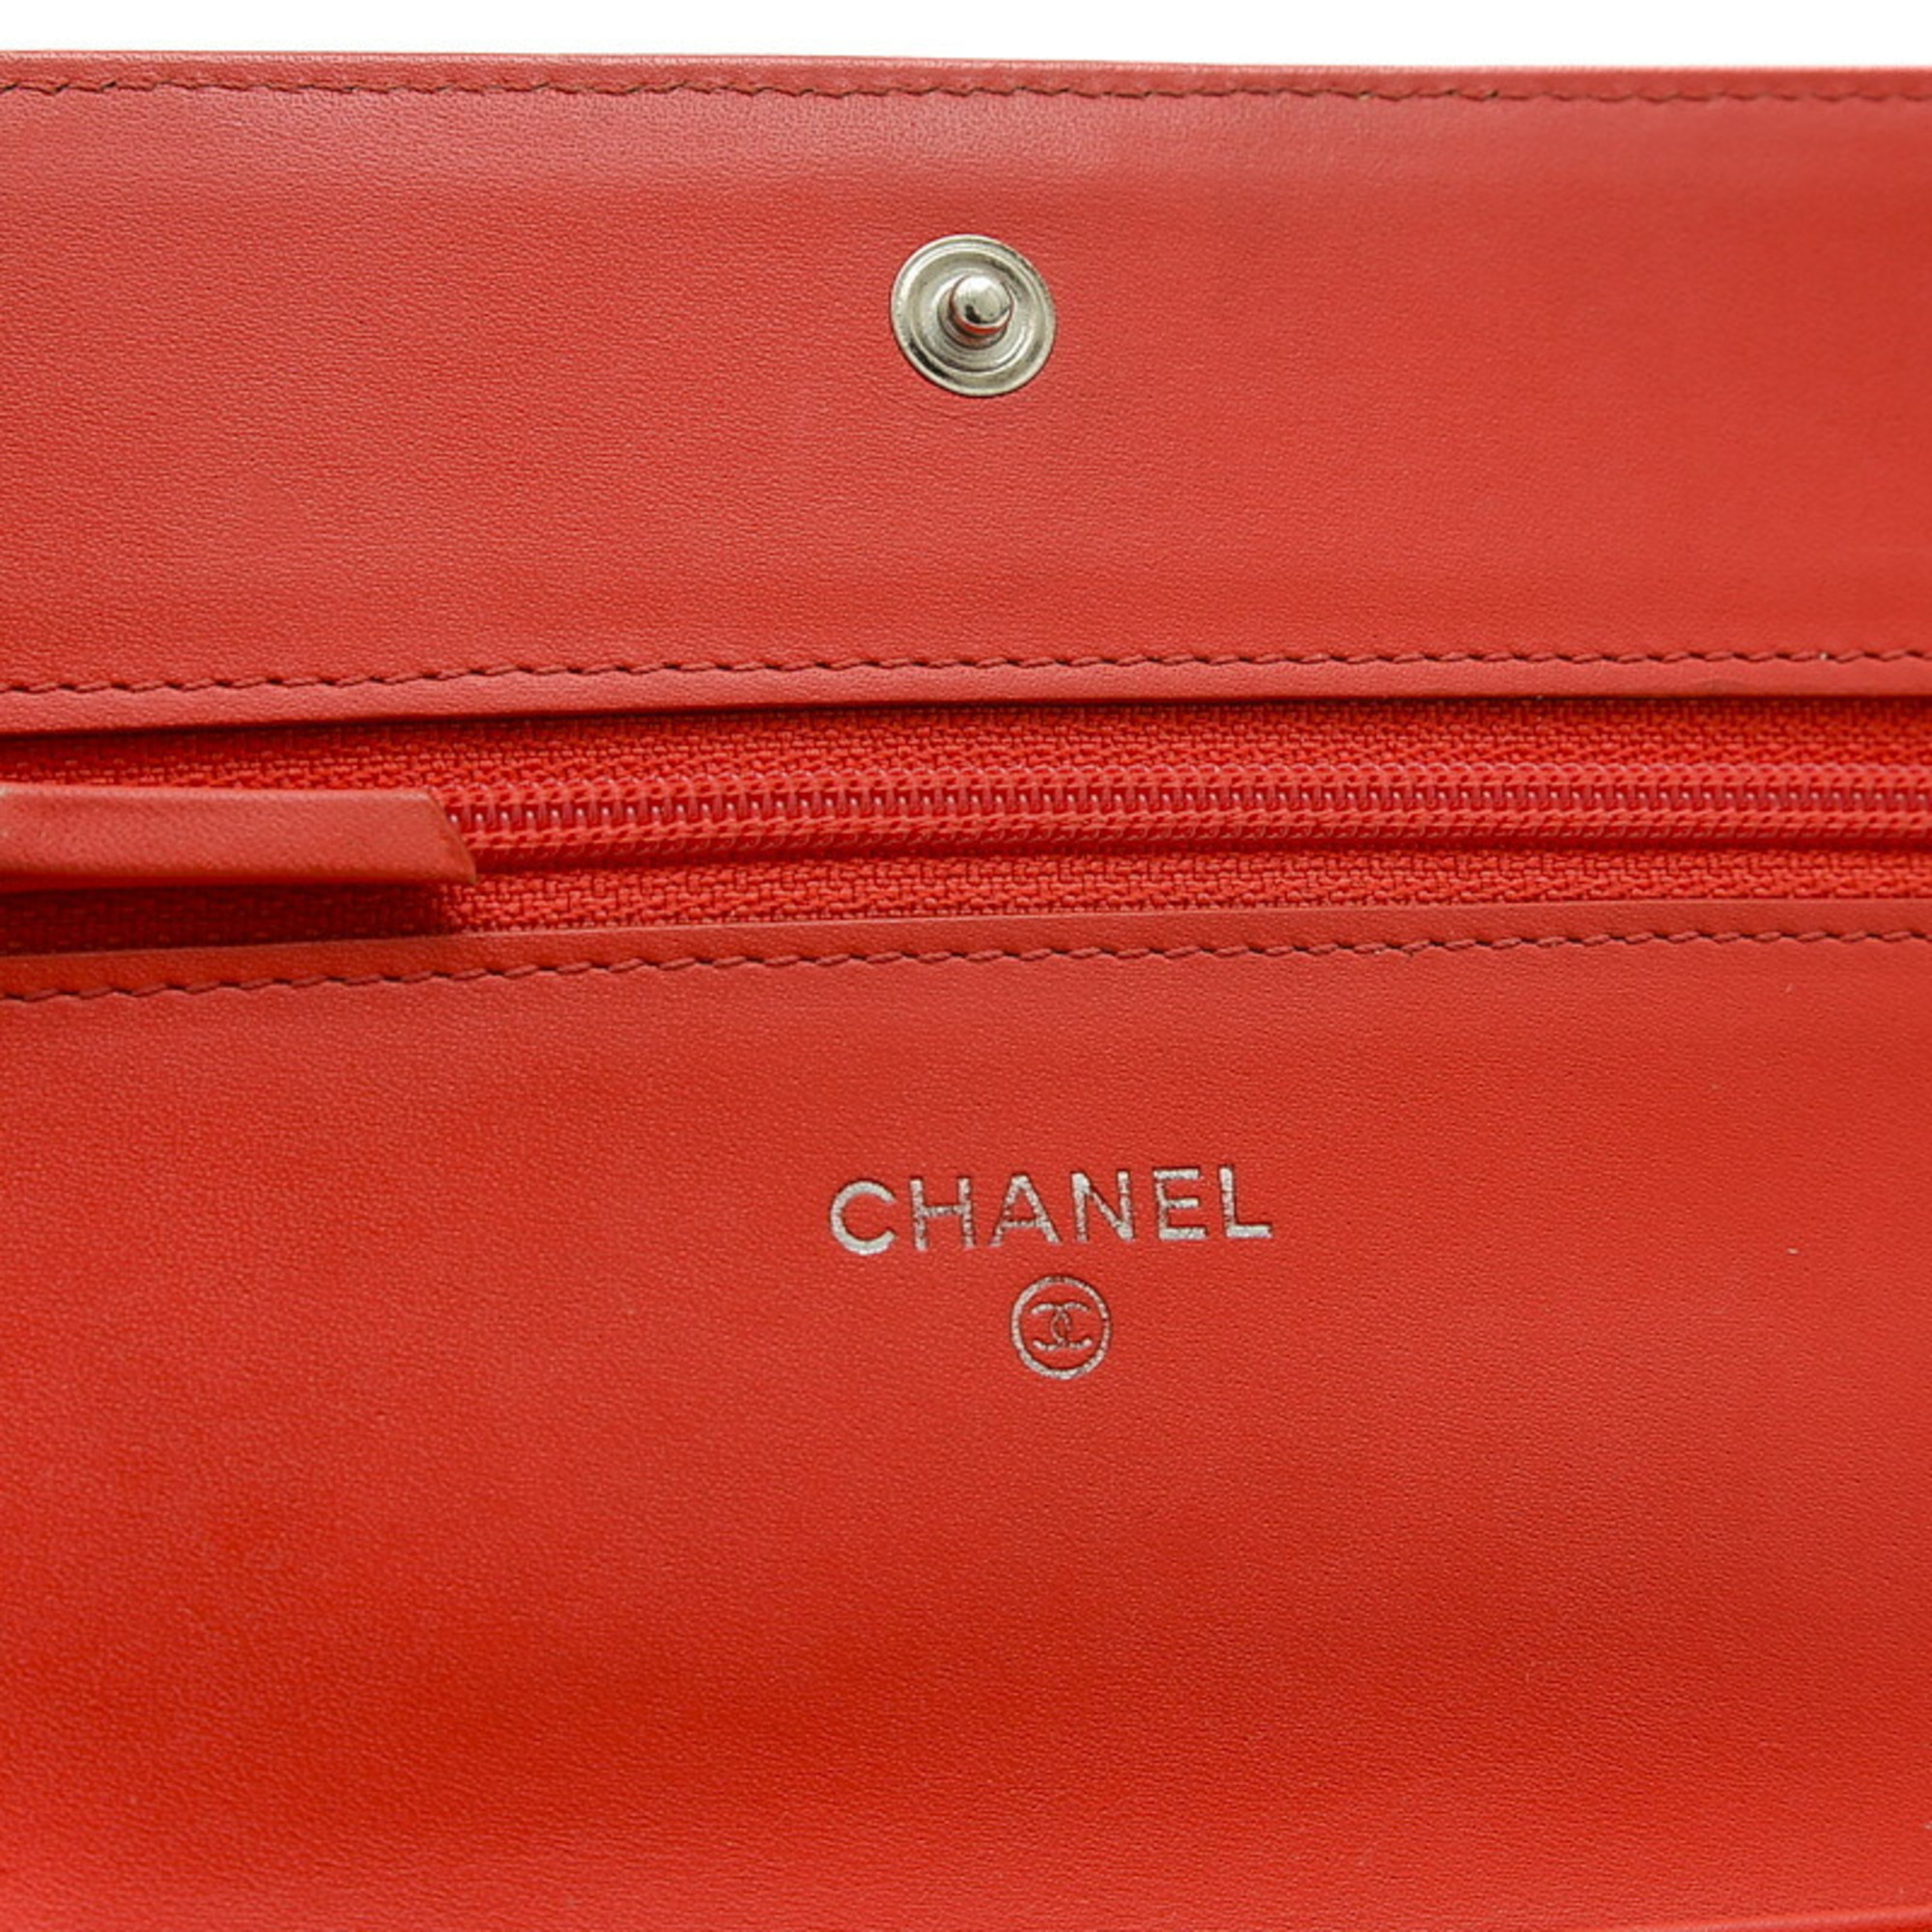 Chanel Coco Mark Chain Wallet Long Caviar Skin Coral Pink 8654